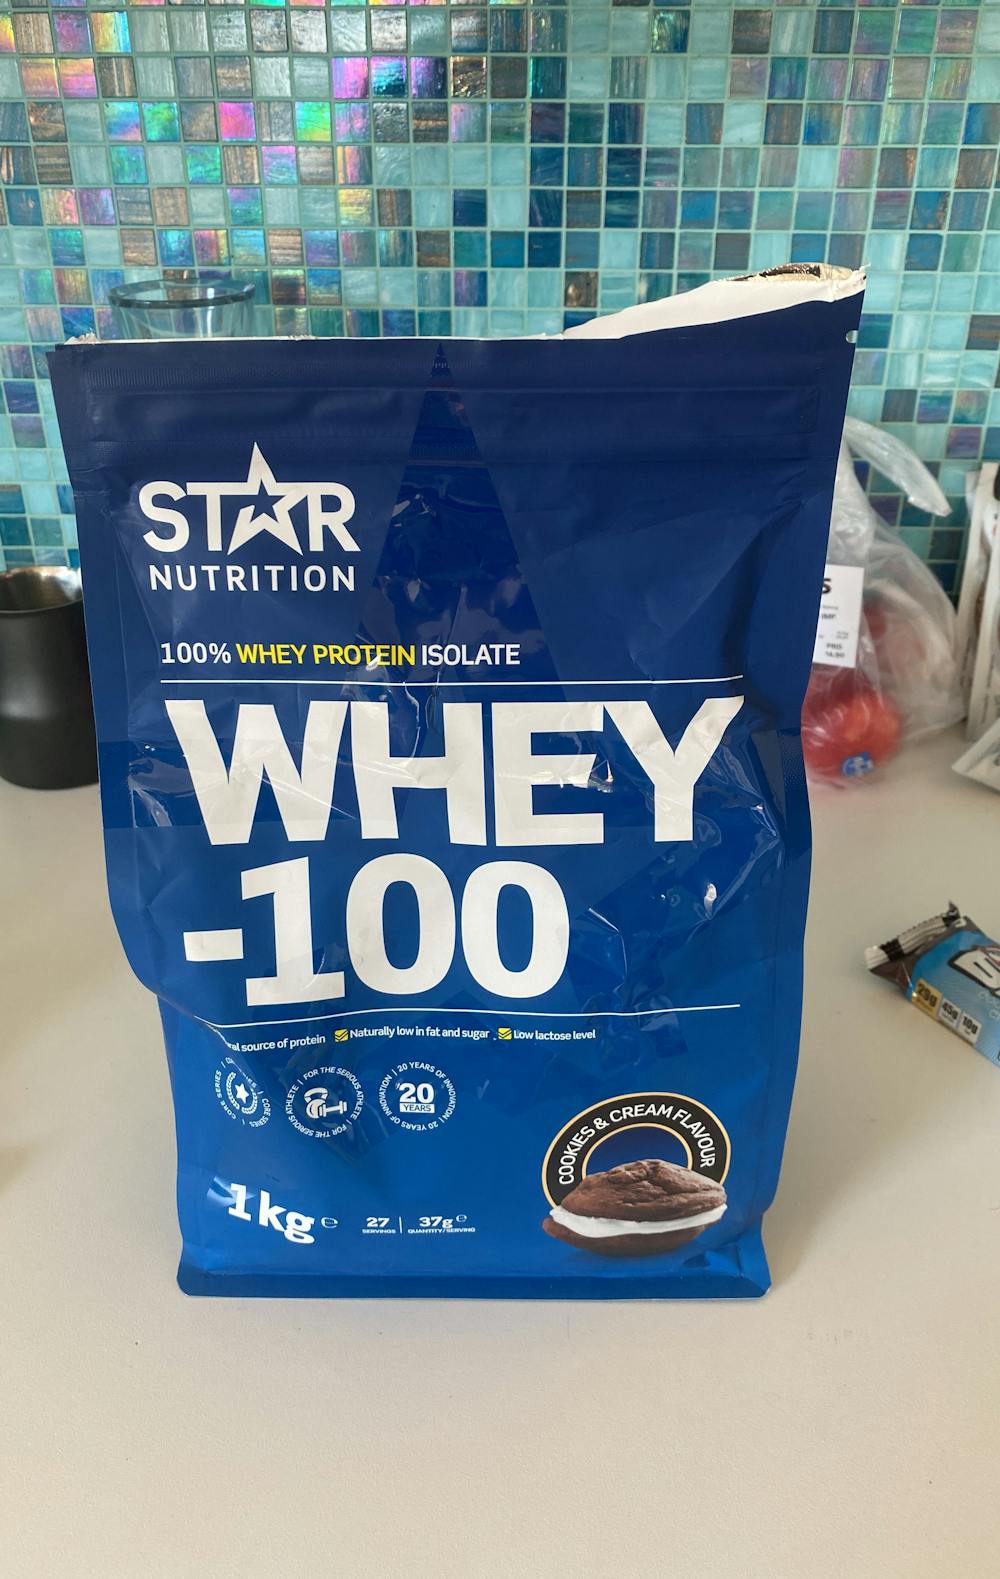 Whey-100 Cookies & Cream Flavour, Star Nutrition